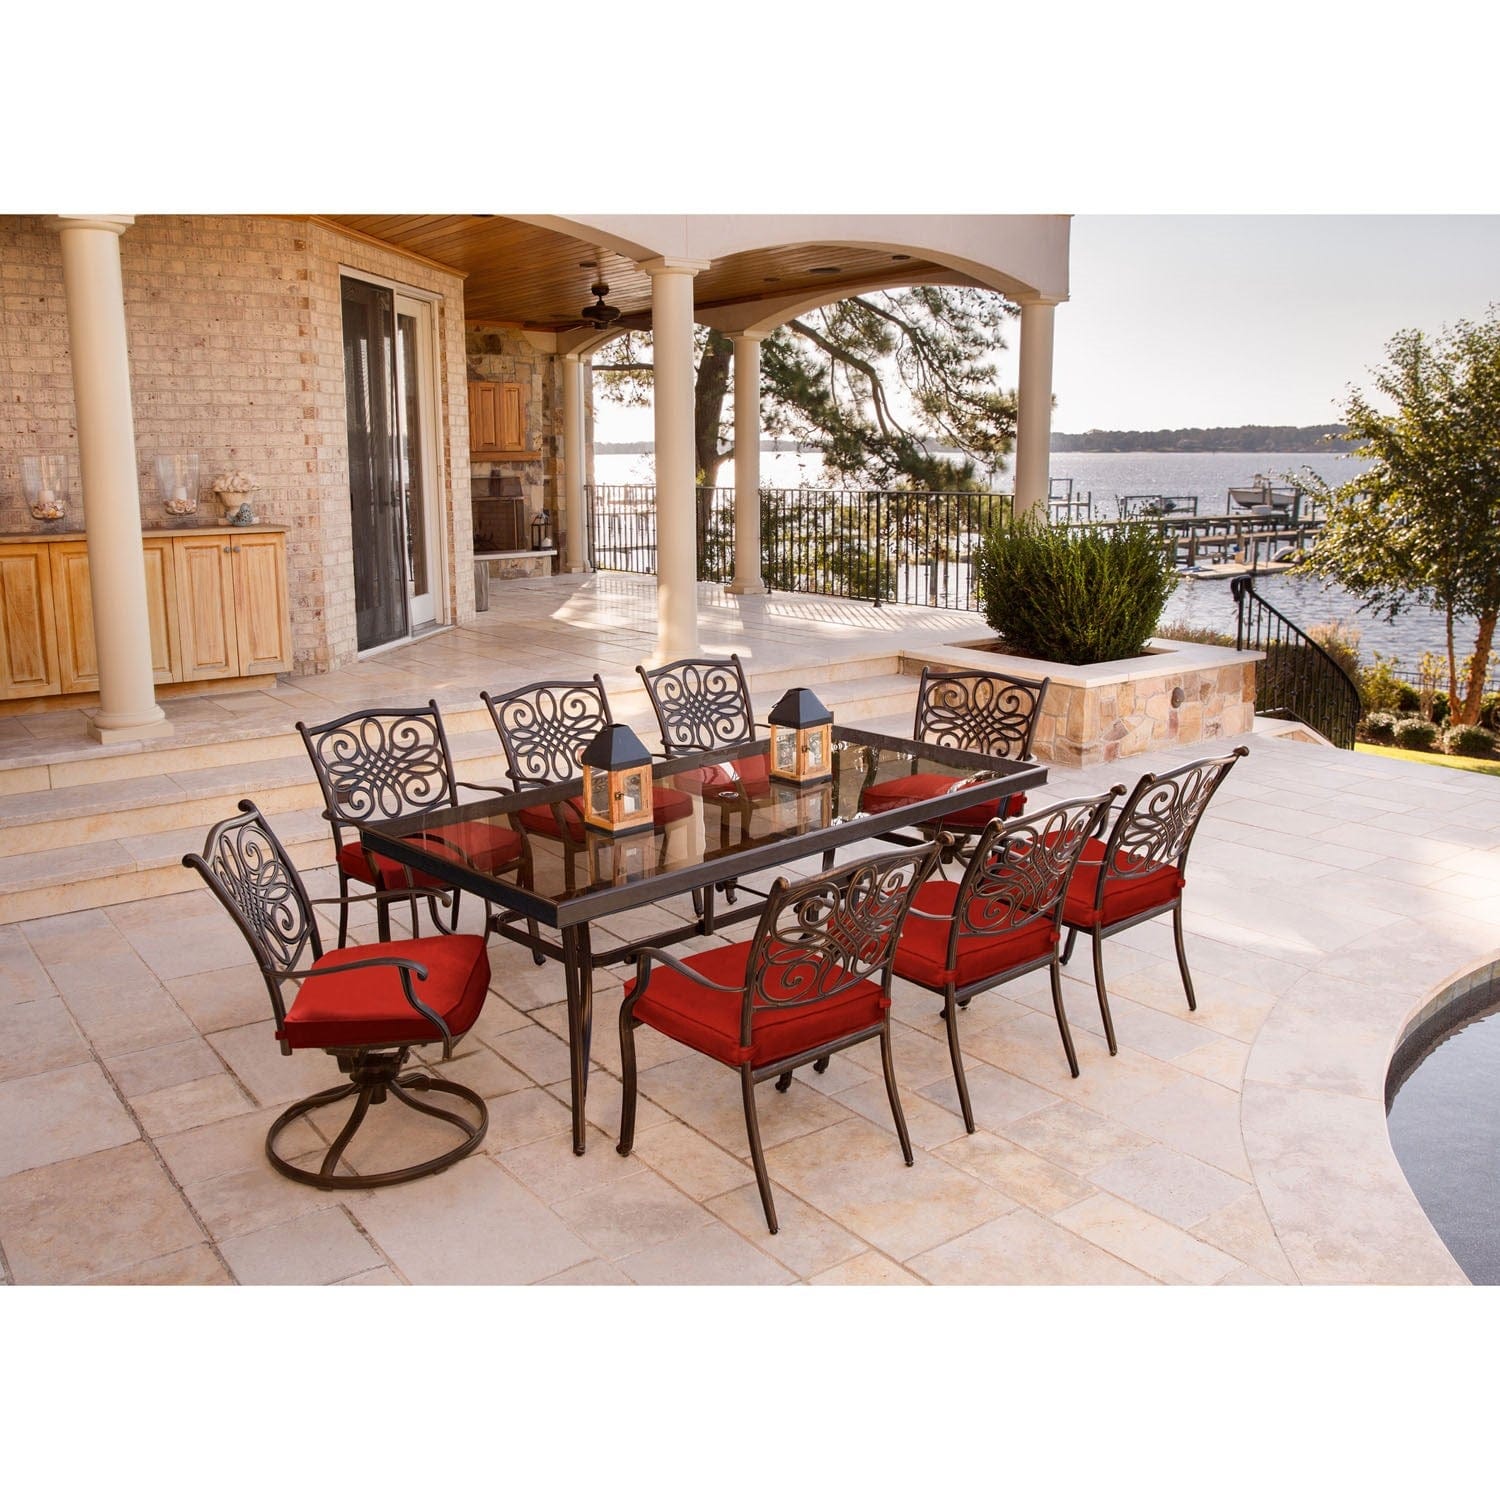 Hanover Outdoor Dining Set Hanover - Traditions 9-Piece Aluminum Frame Dining Set in Red with Extra Large Glass-Top Dining Table, 2 Swivel Rockers, and 6 Dining Chairs | TRADDN9PCSW2G-RED